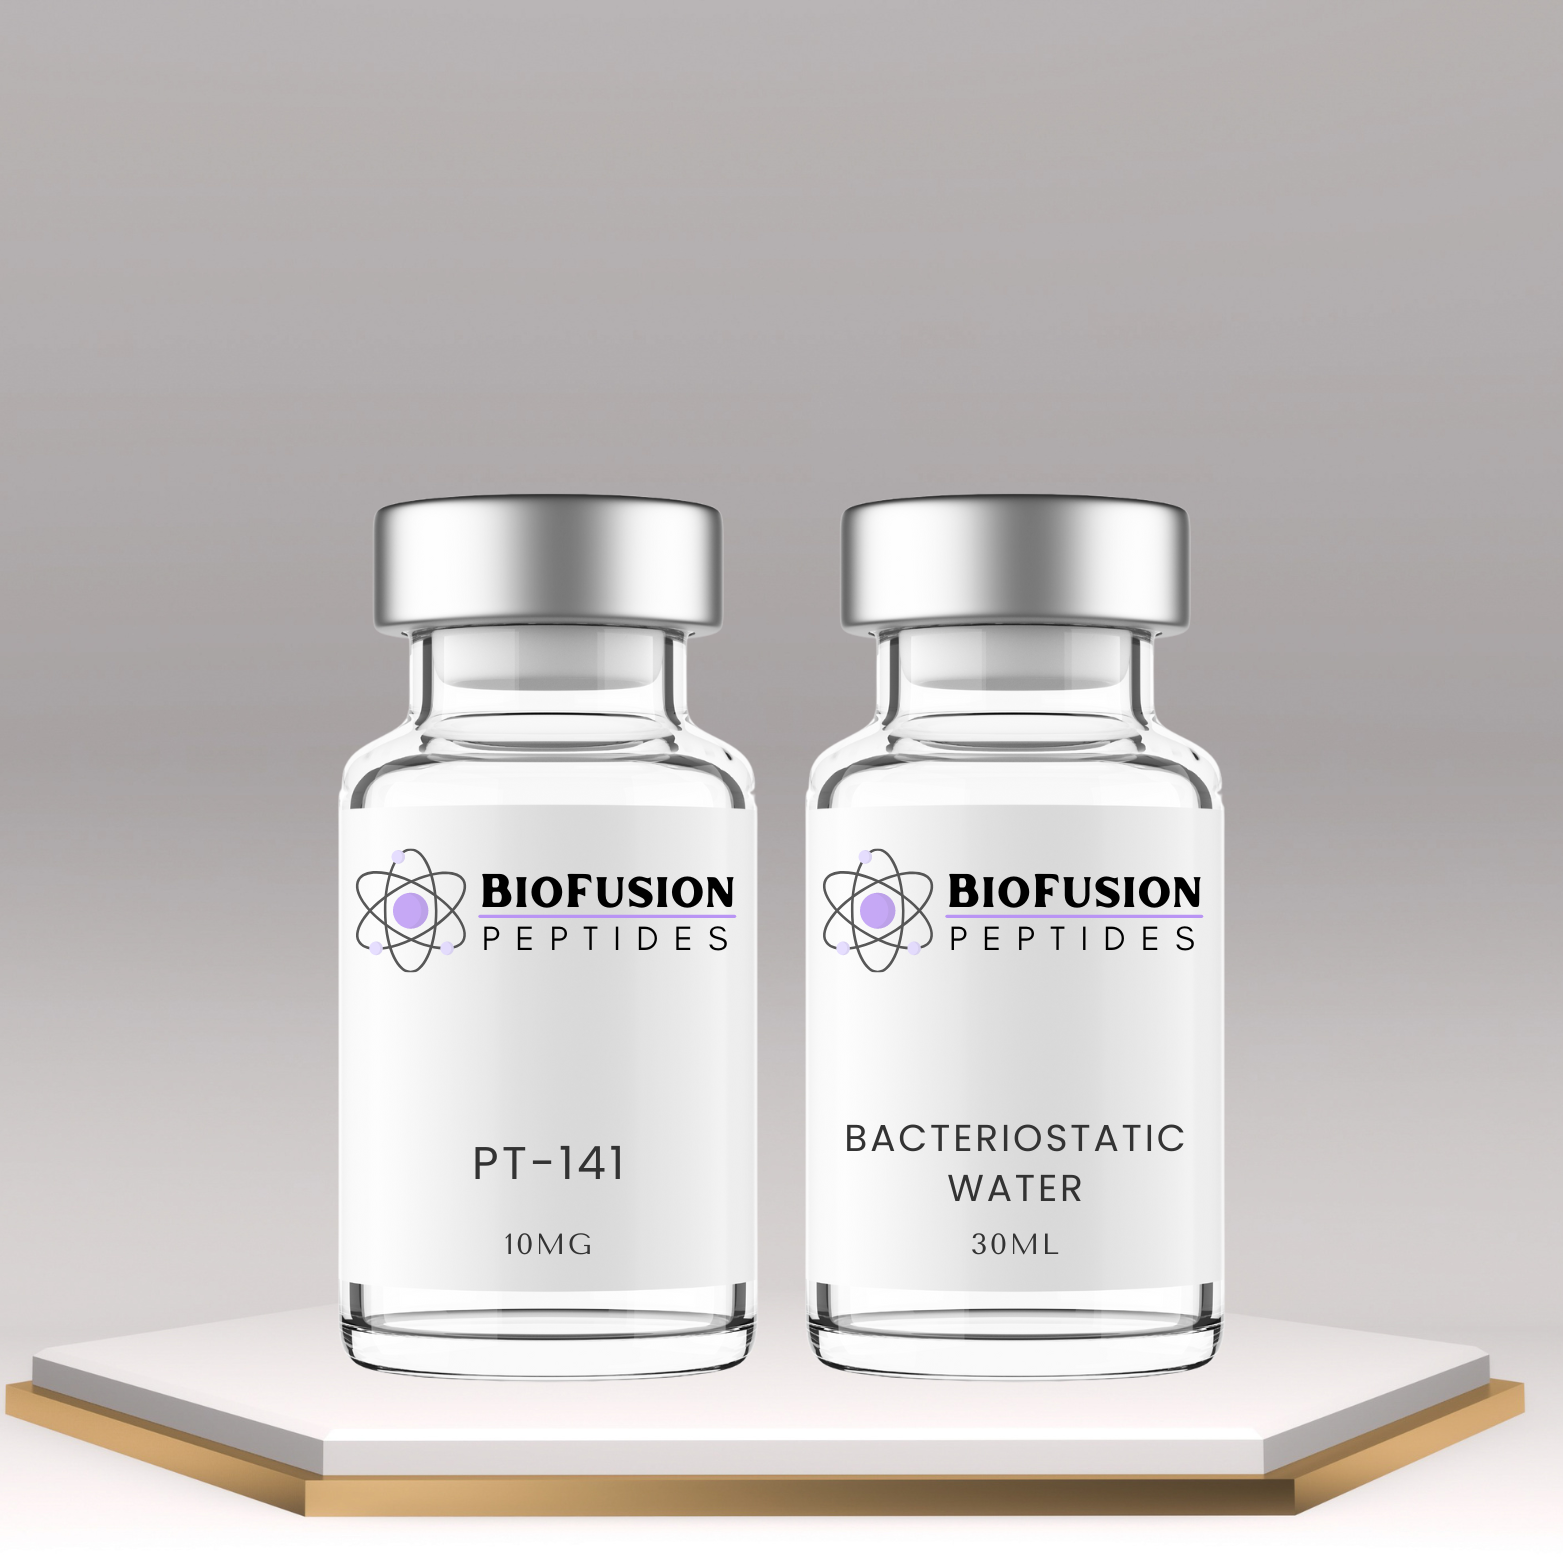 BioFusion Peptides PT-141 kit with bacteriostatic water